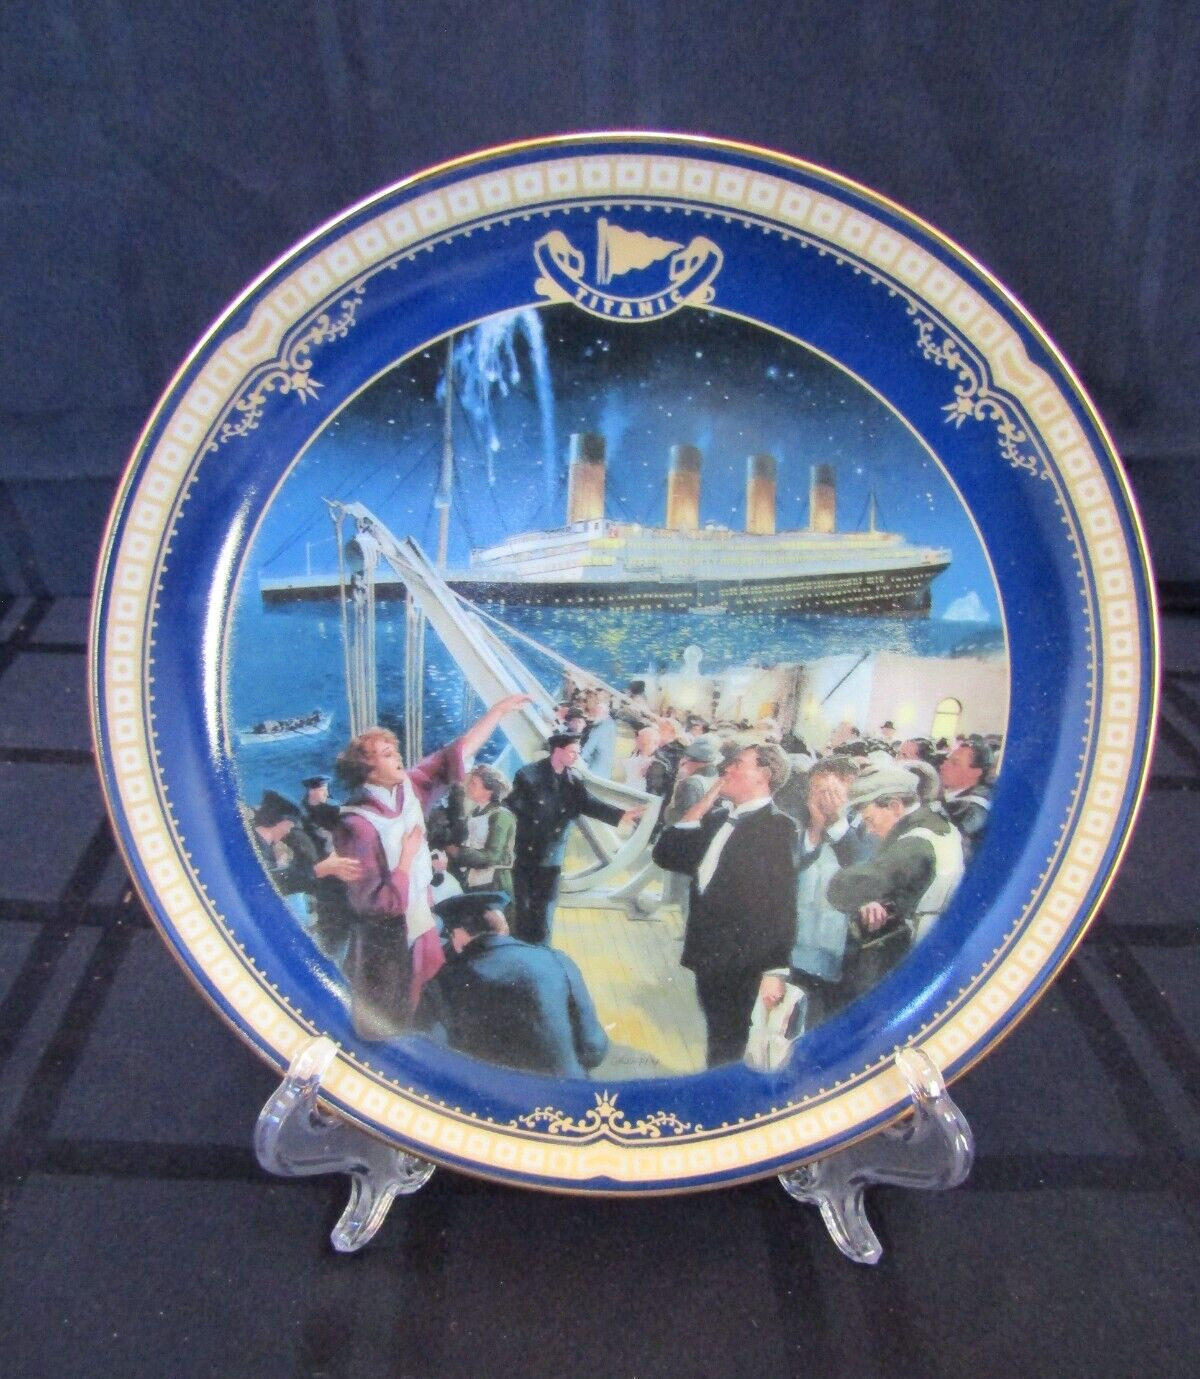 Titanic Bradford Exchange Collector Plate #12, The Final Farewell, Plate # 9557A